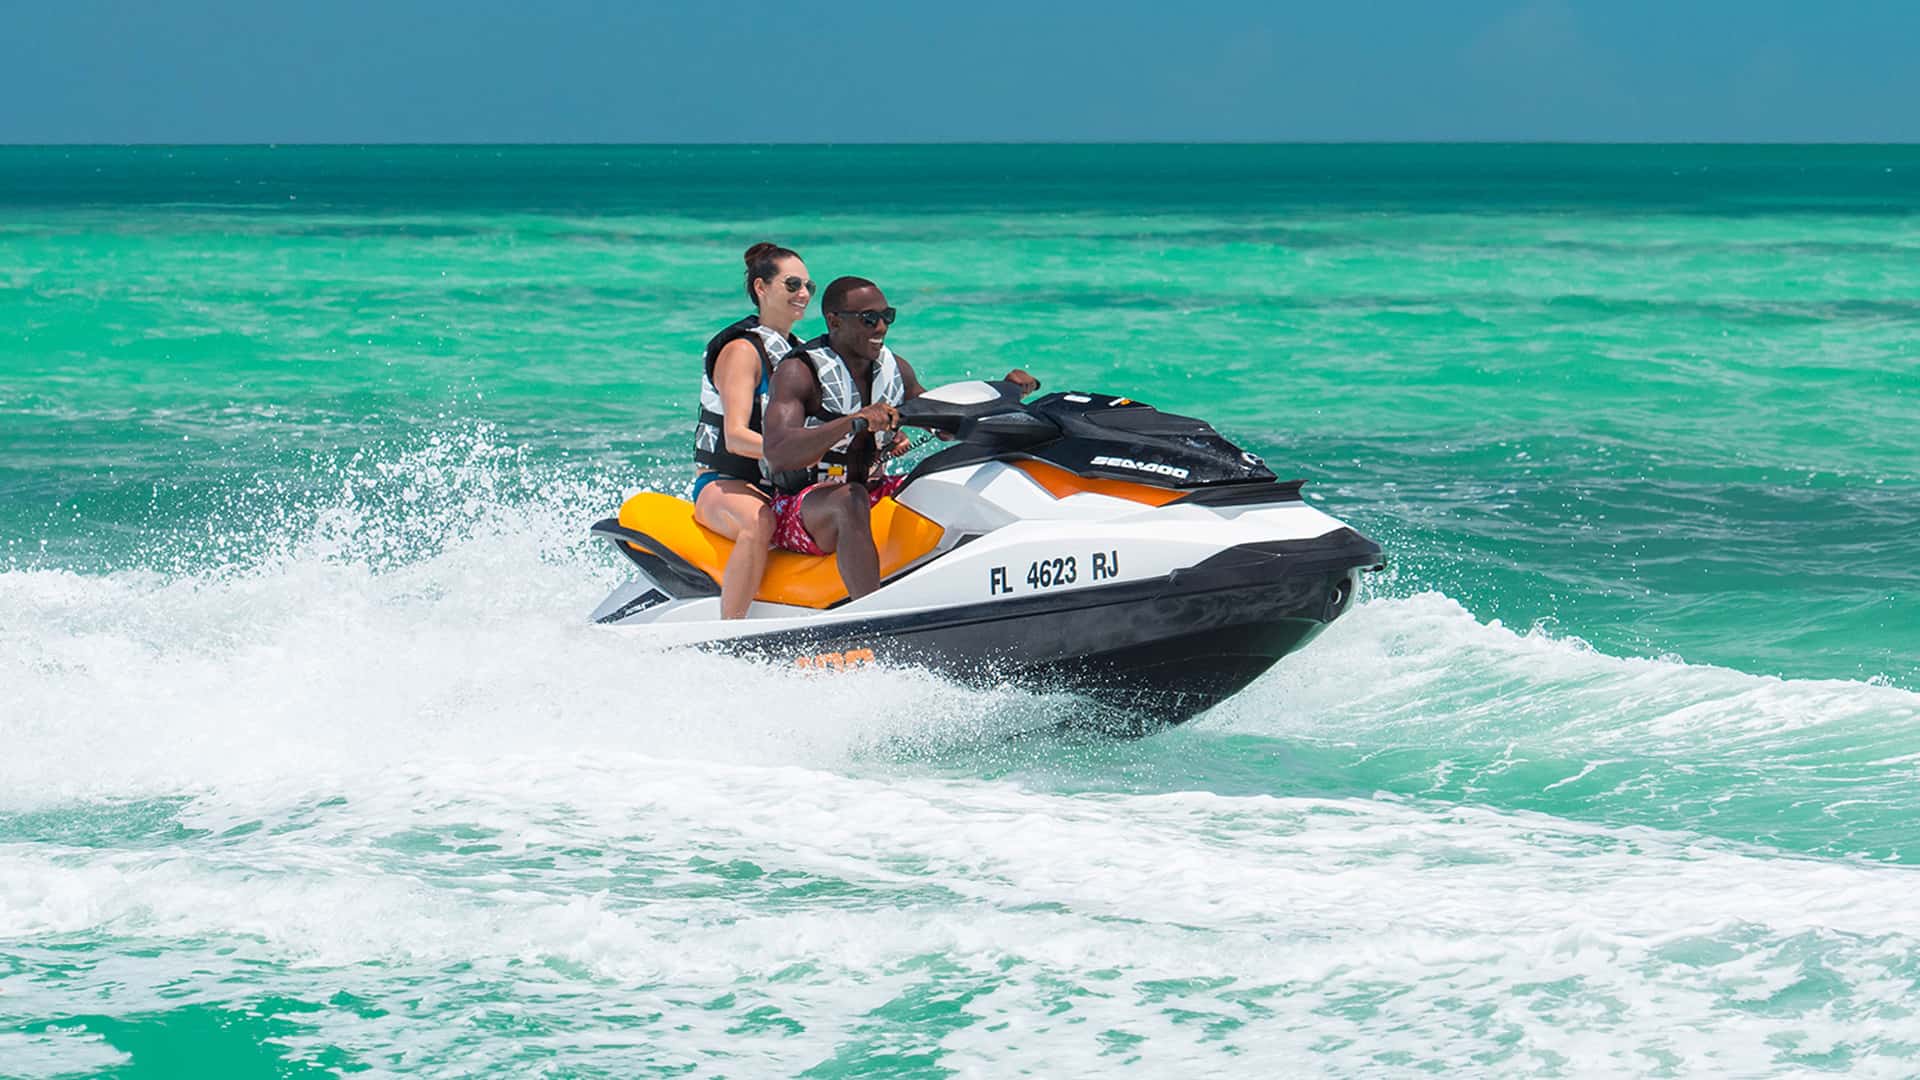 Image of couple aboard jet ski outside on water